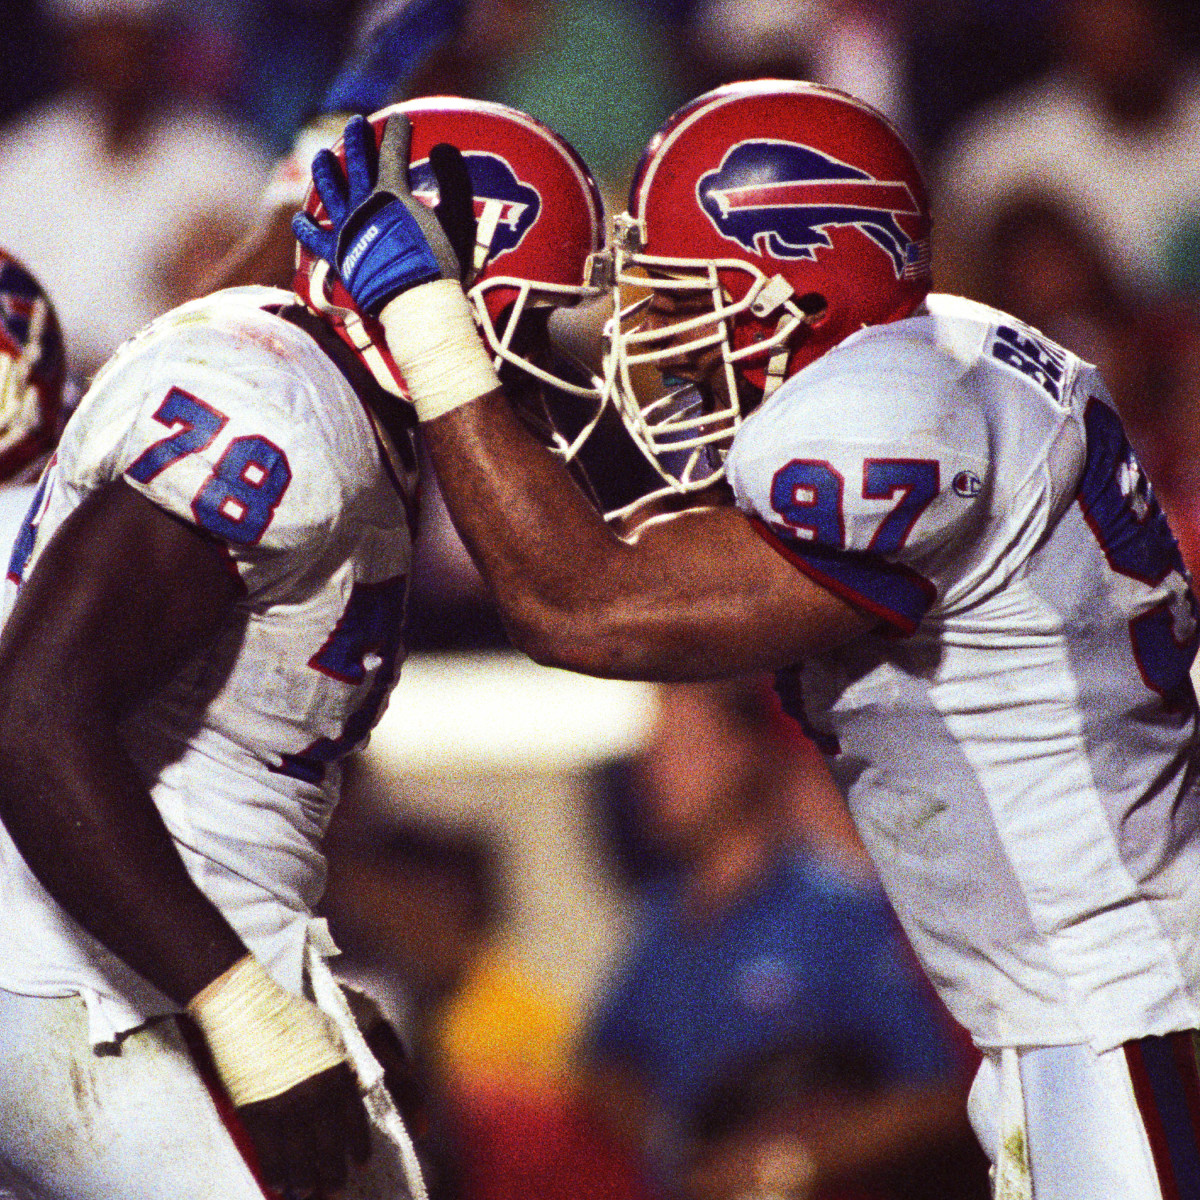 Buffalo Bills defensive end Bruce Smith (78) and linebacker Cornelius Bennett (97) react on the field during Super Bowl XXV against the New York Giants at Tampa Stadium. The Giants defeated the Bills 19-20.